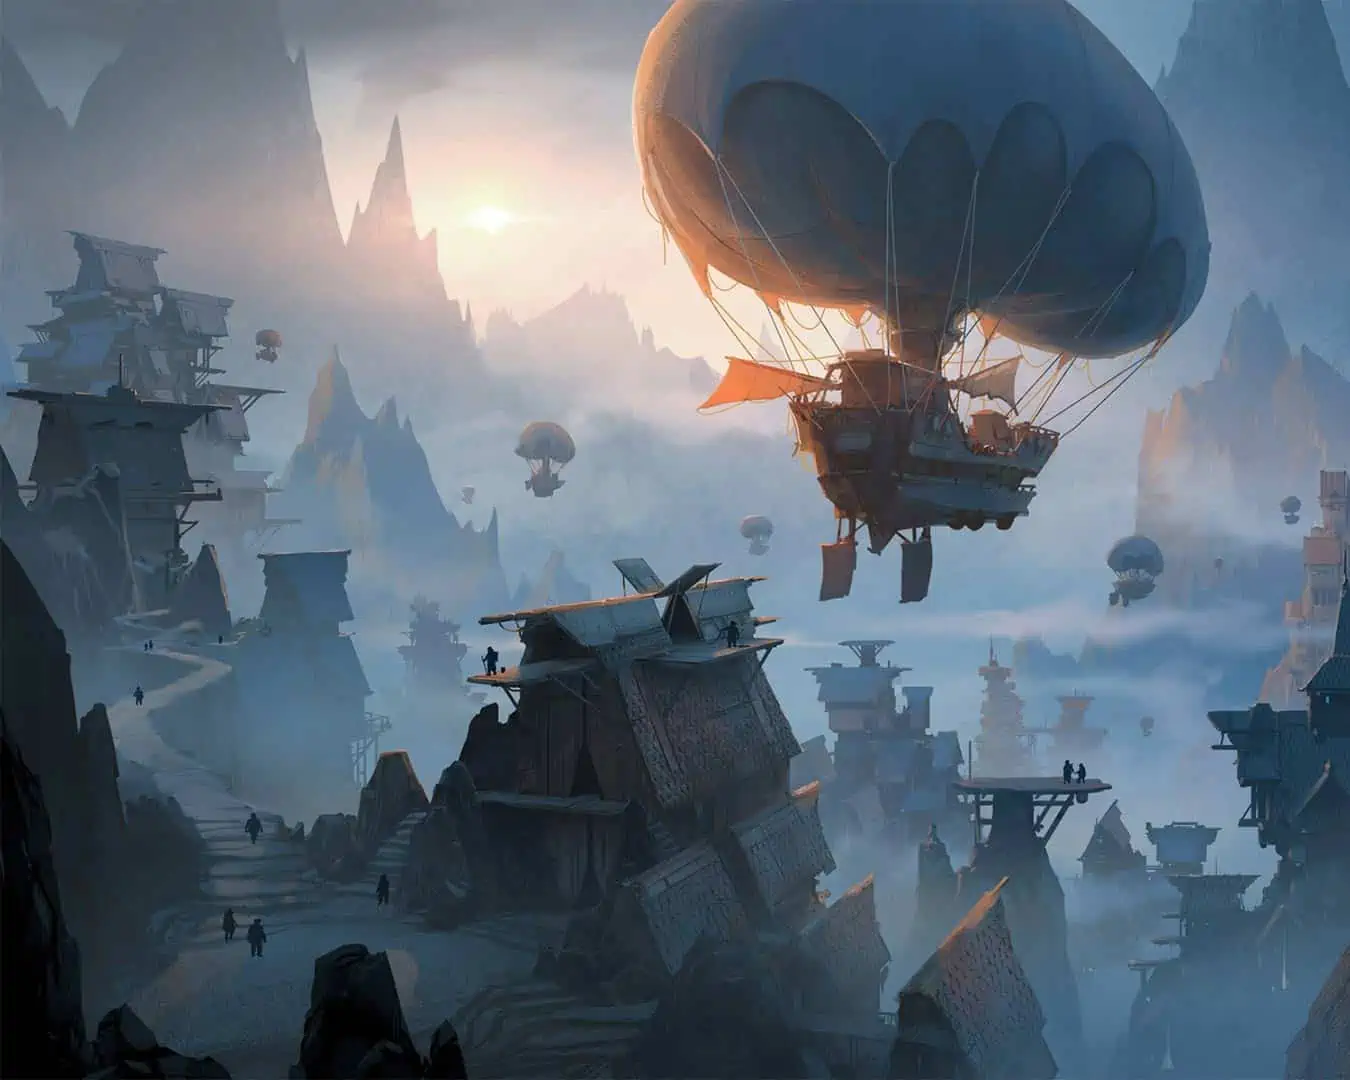 colorful illustration of Fiorderik during sunrise, a flying craft in the foreground